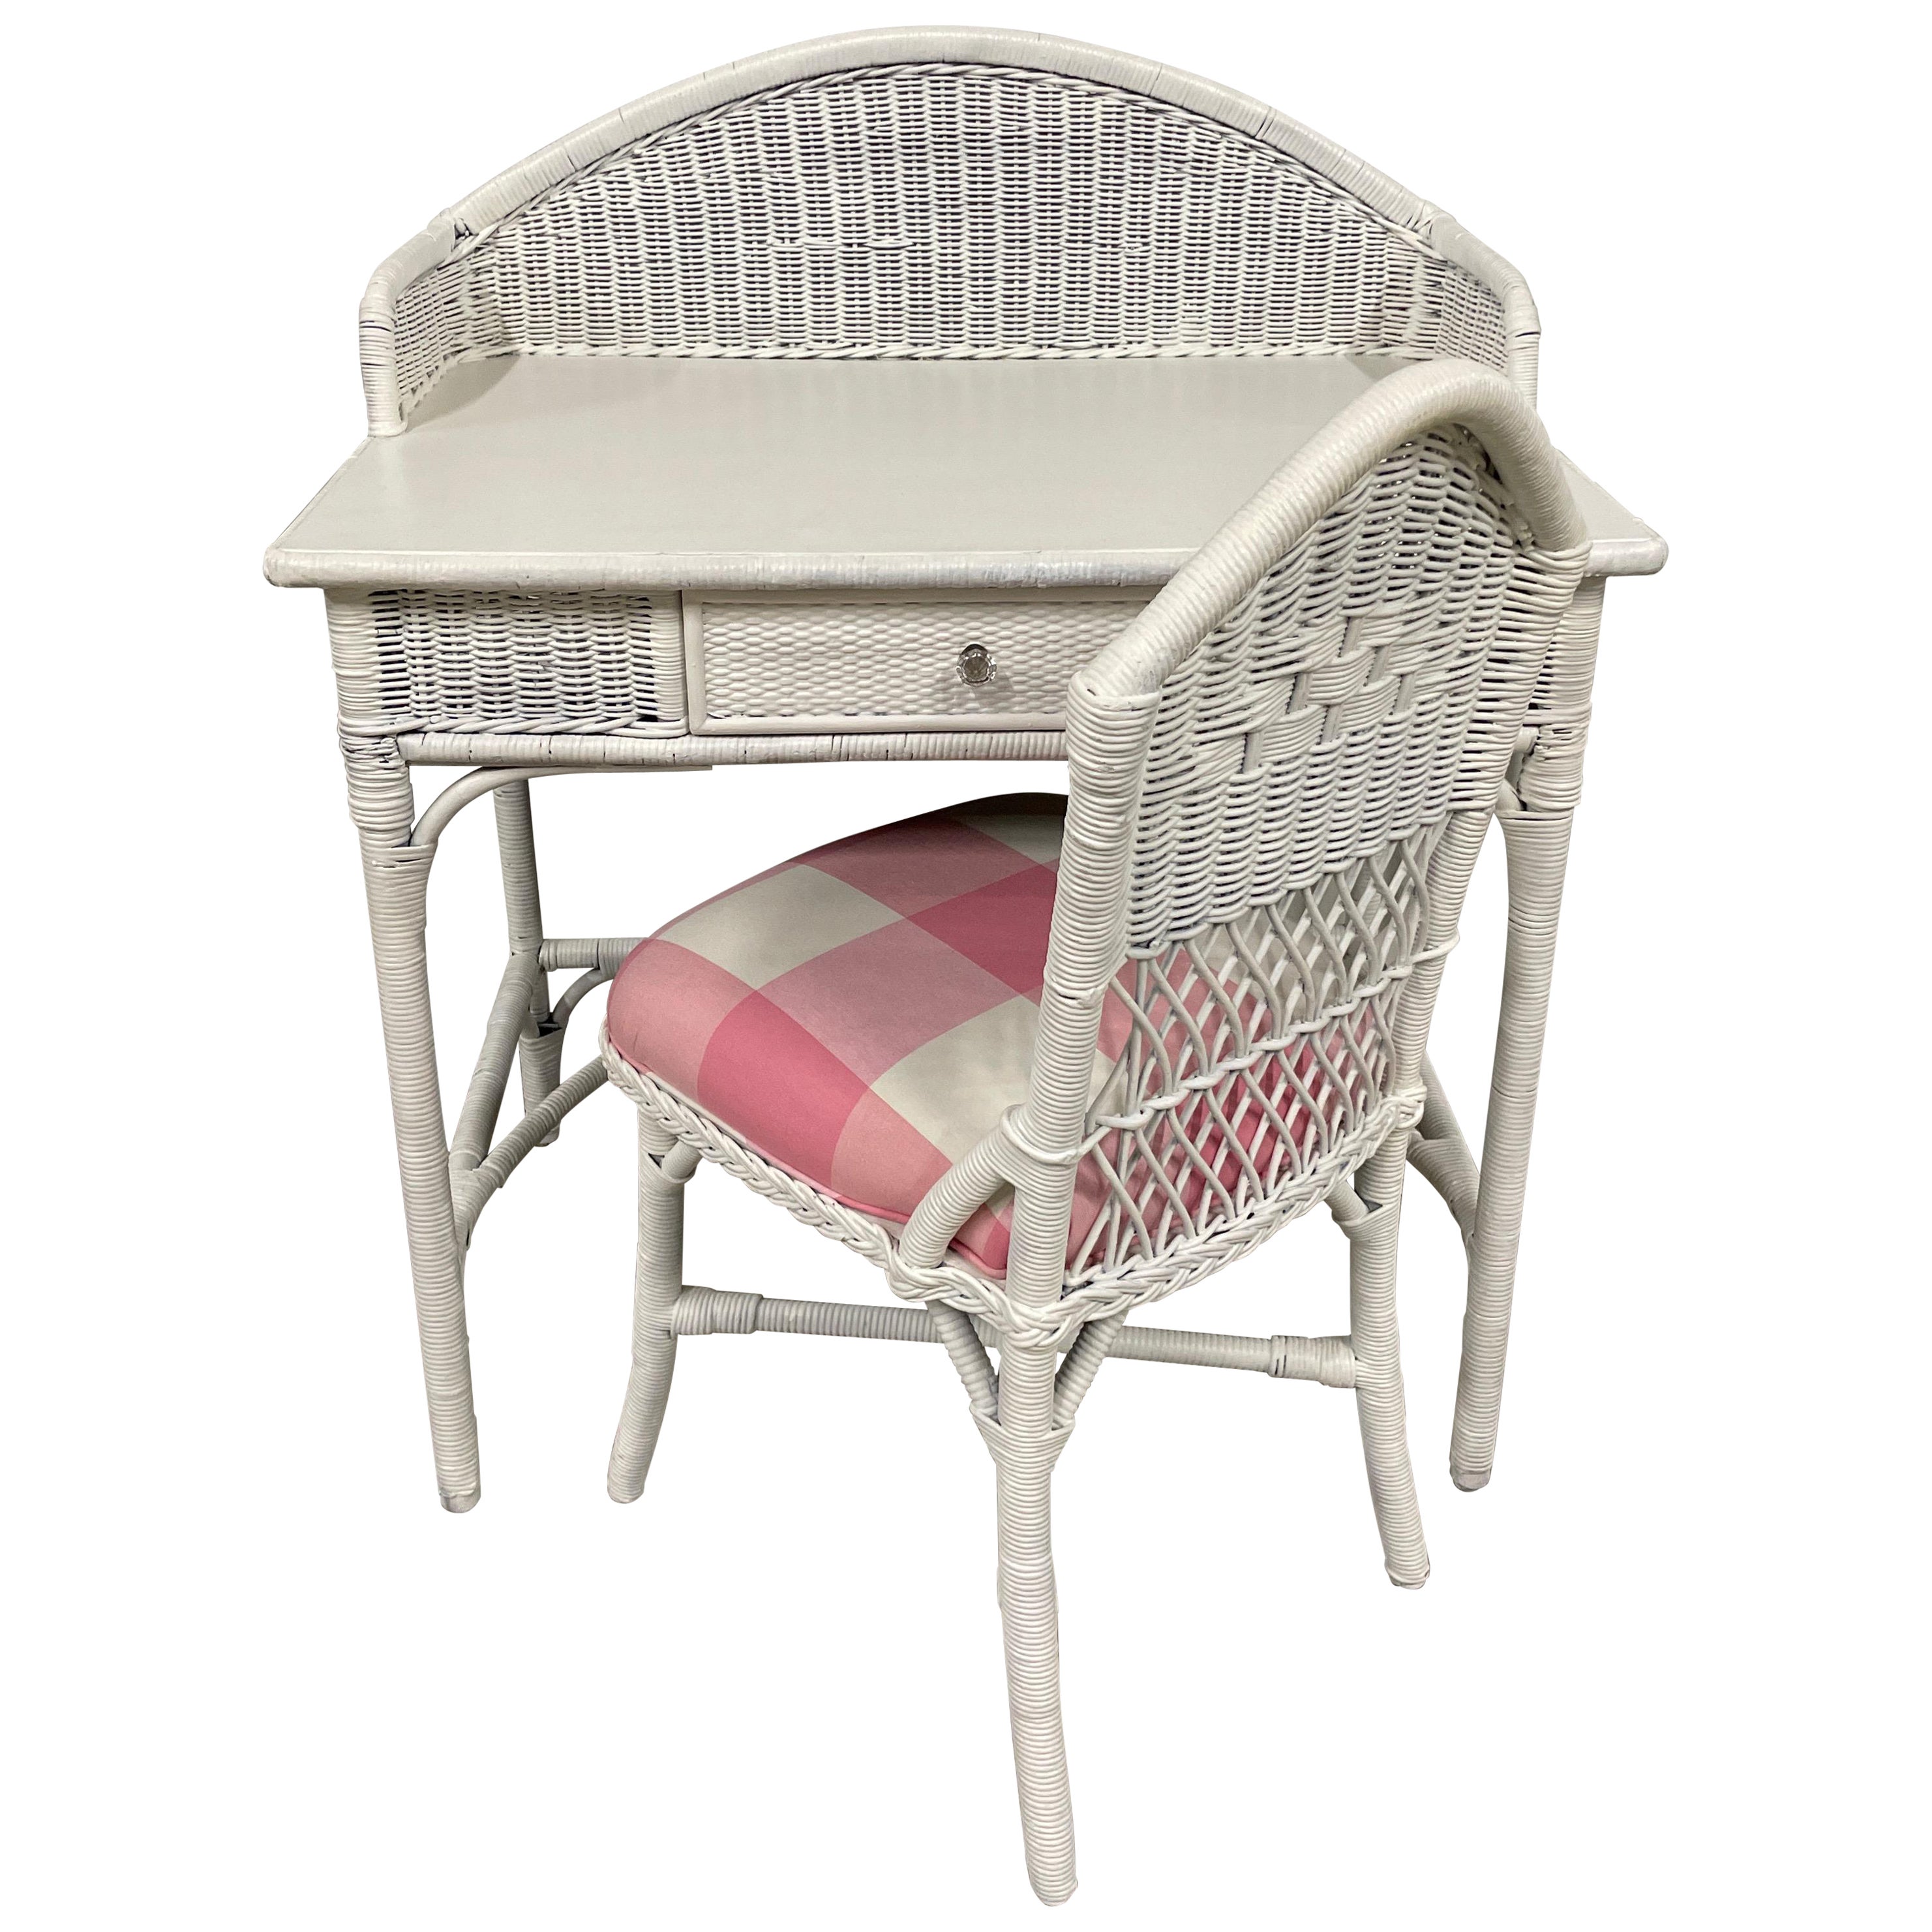 Antique White Wicker Dressing Table / Desk & Chair Set For Sale